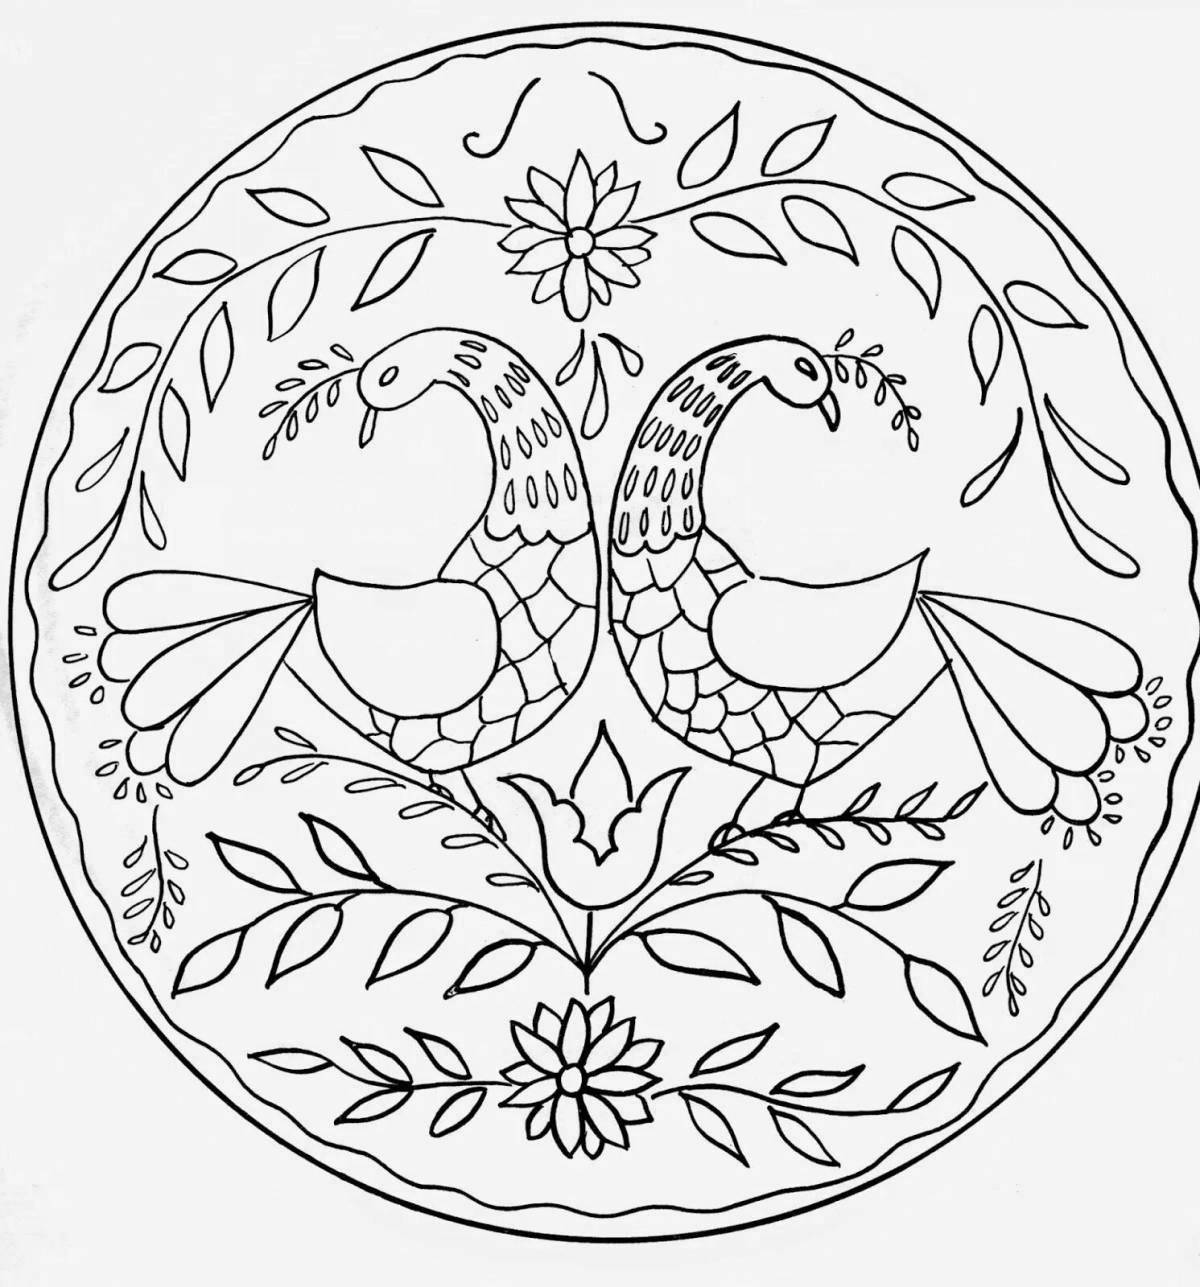 Coloring page charming Gorodets plate